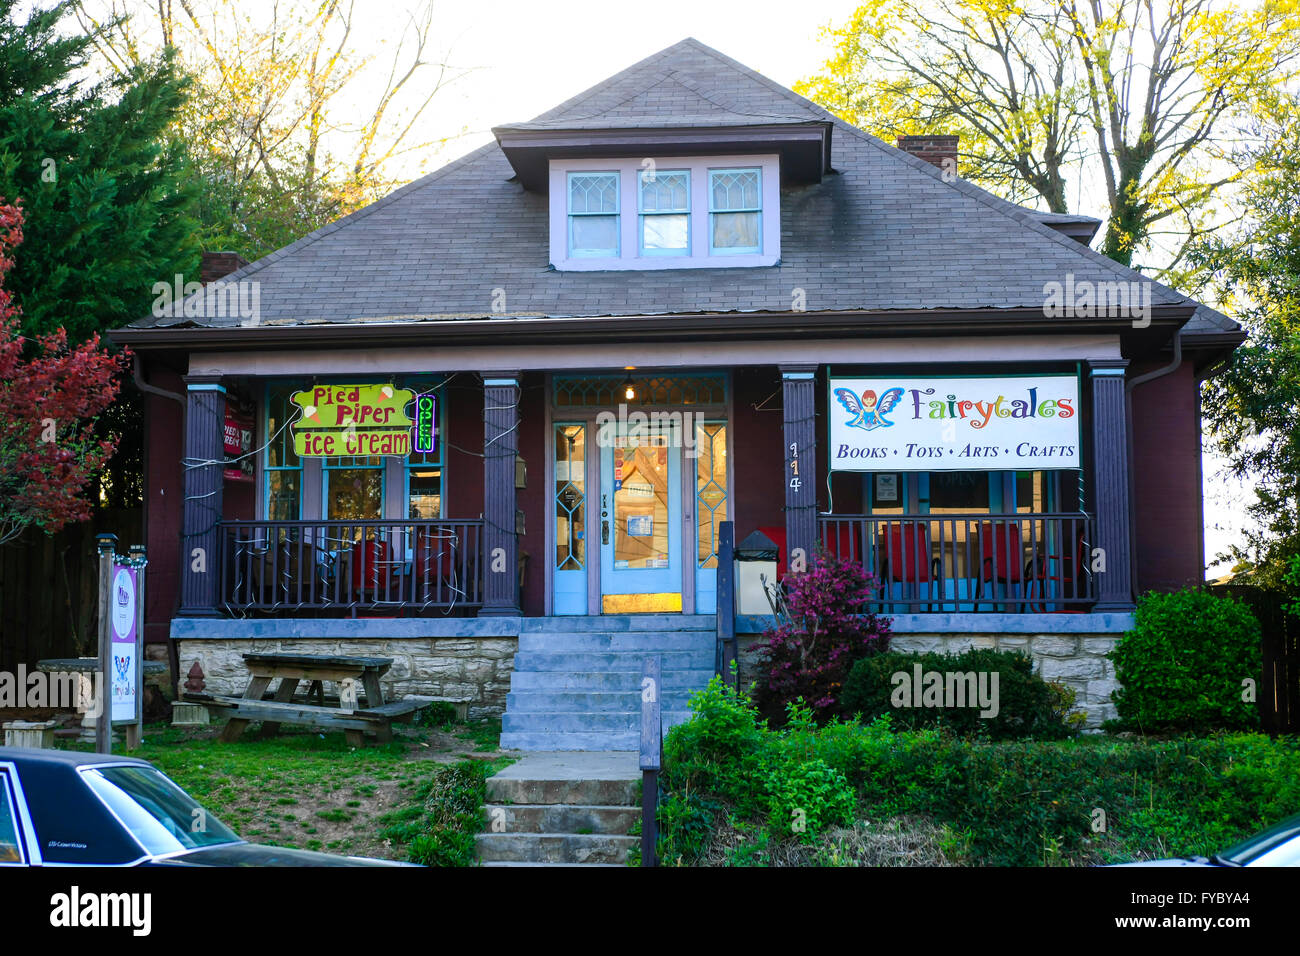 Fairytales and the Pied Piper Creamery in a quaint cottage on 11th Street in East Nashville Stock Photo